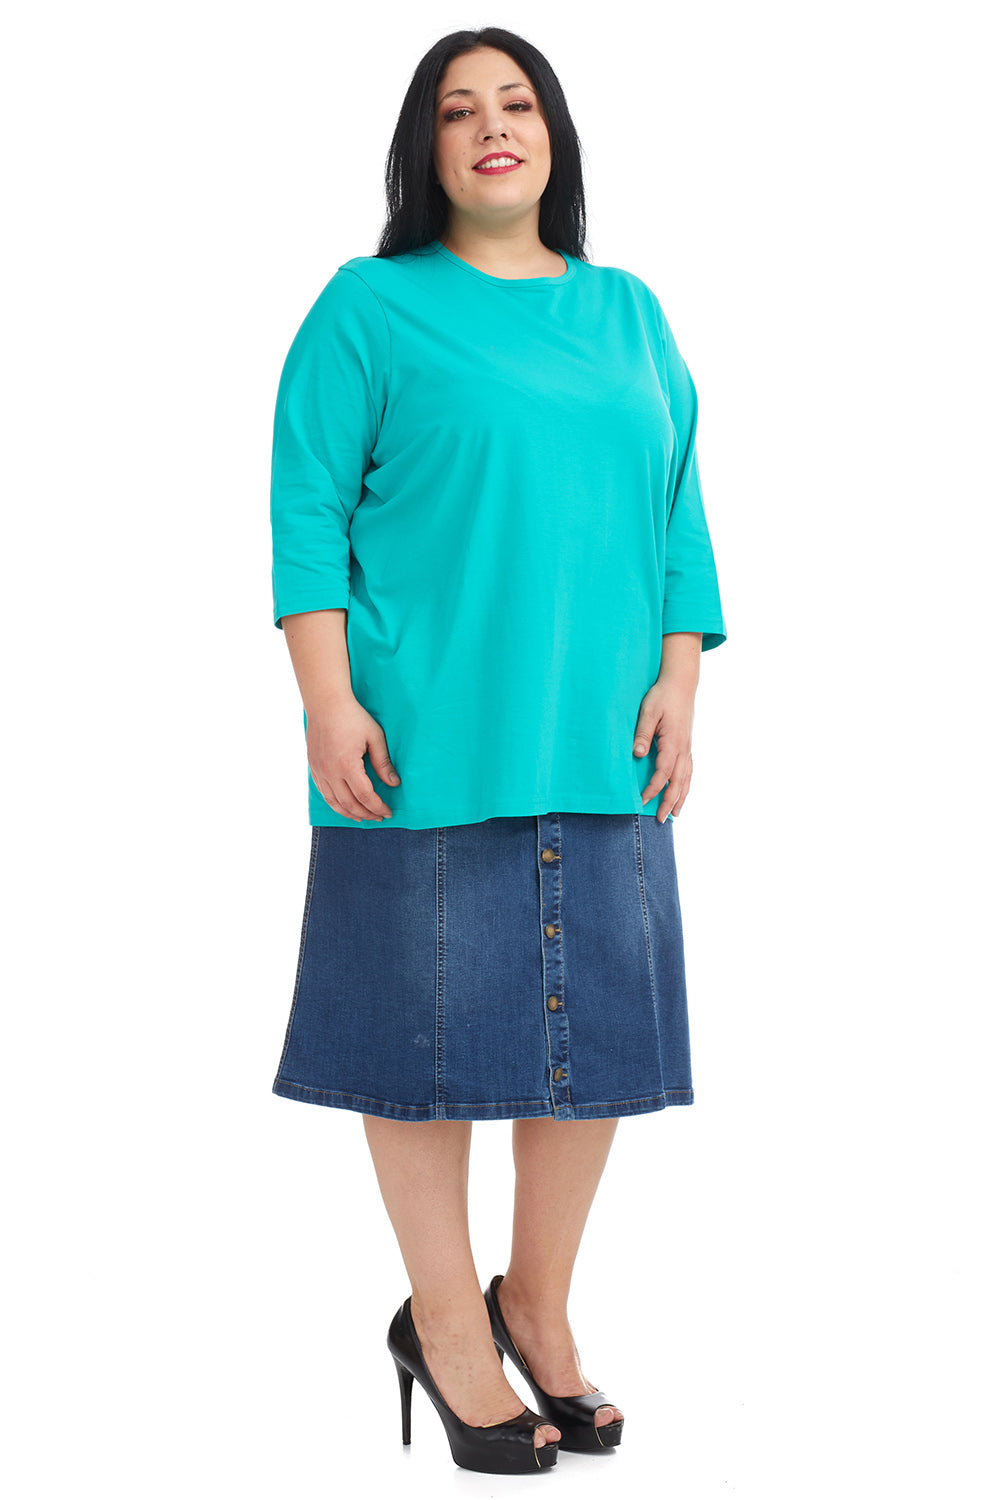 Casual turquoise green 3/4 sleeve baggy plus size t-shirt for women